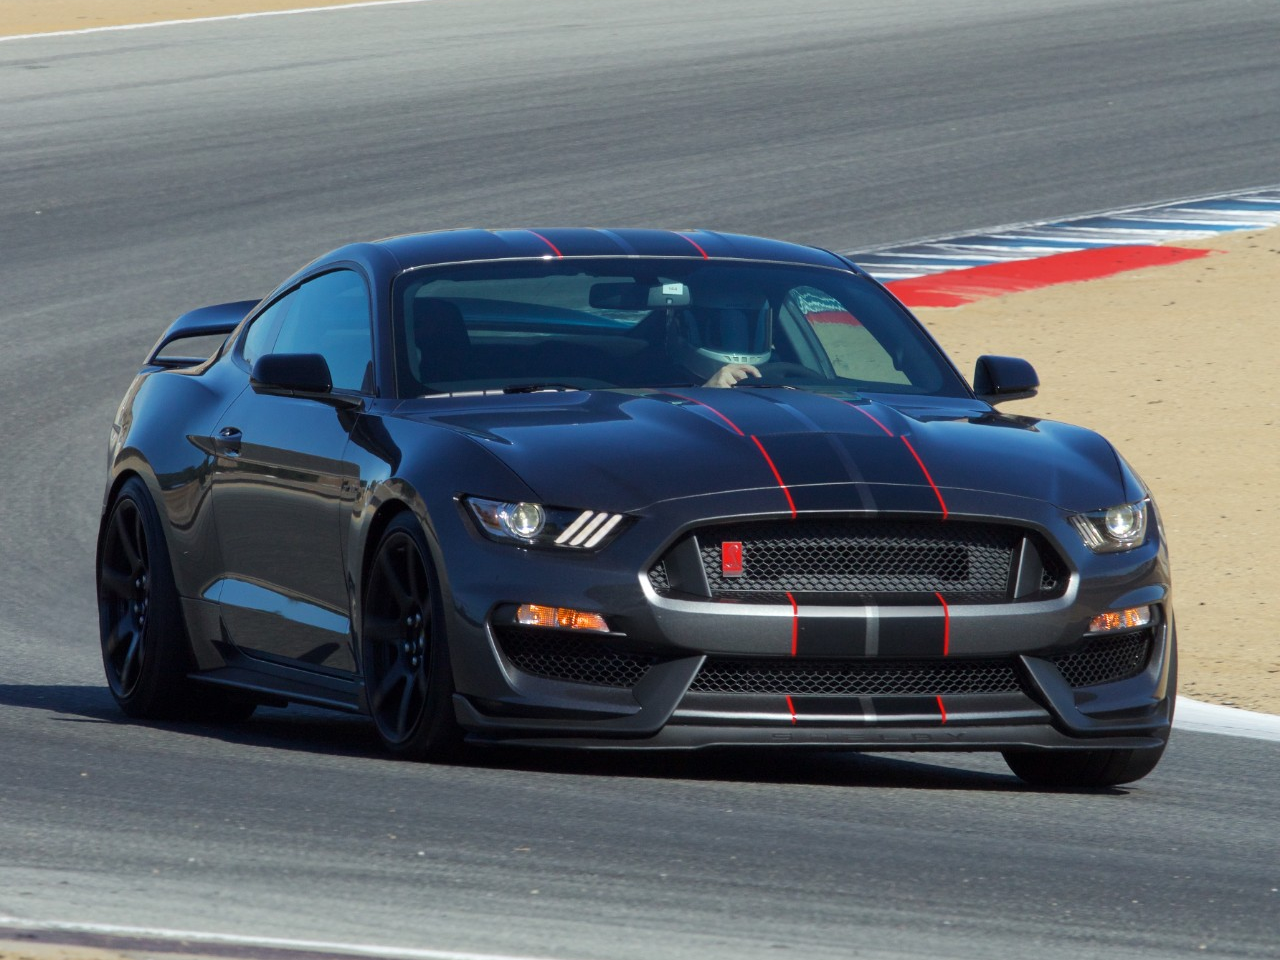  Ford Shelby GT350R Mustang Named Sports Car of the Year by 